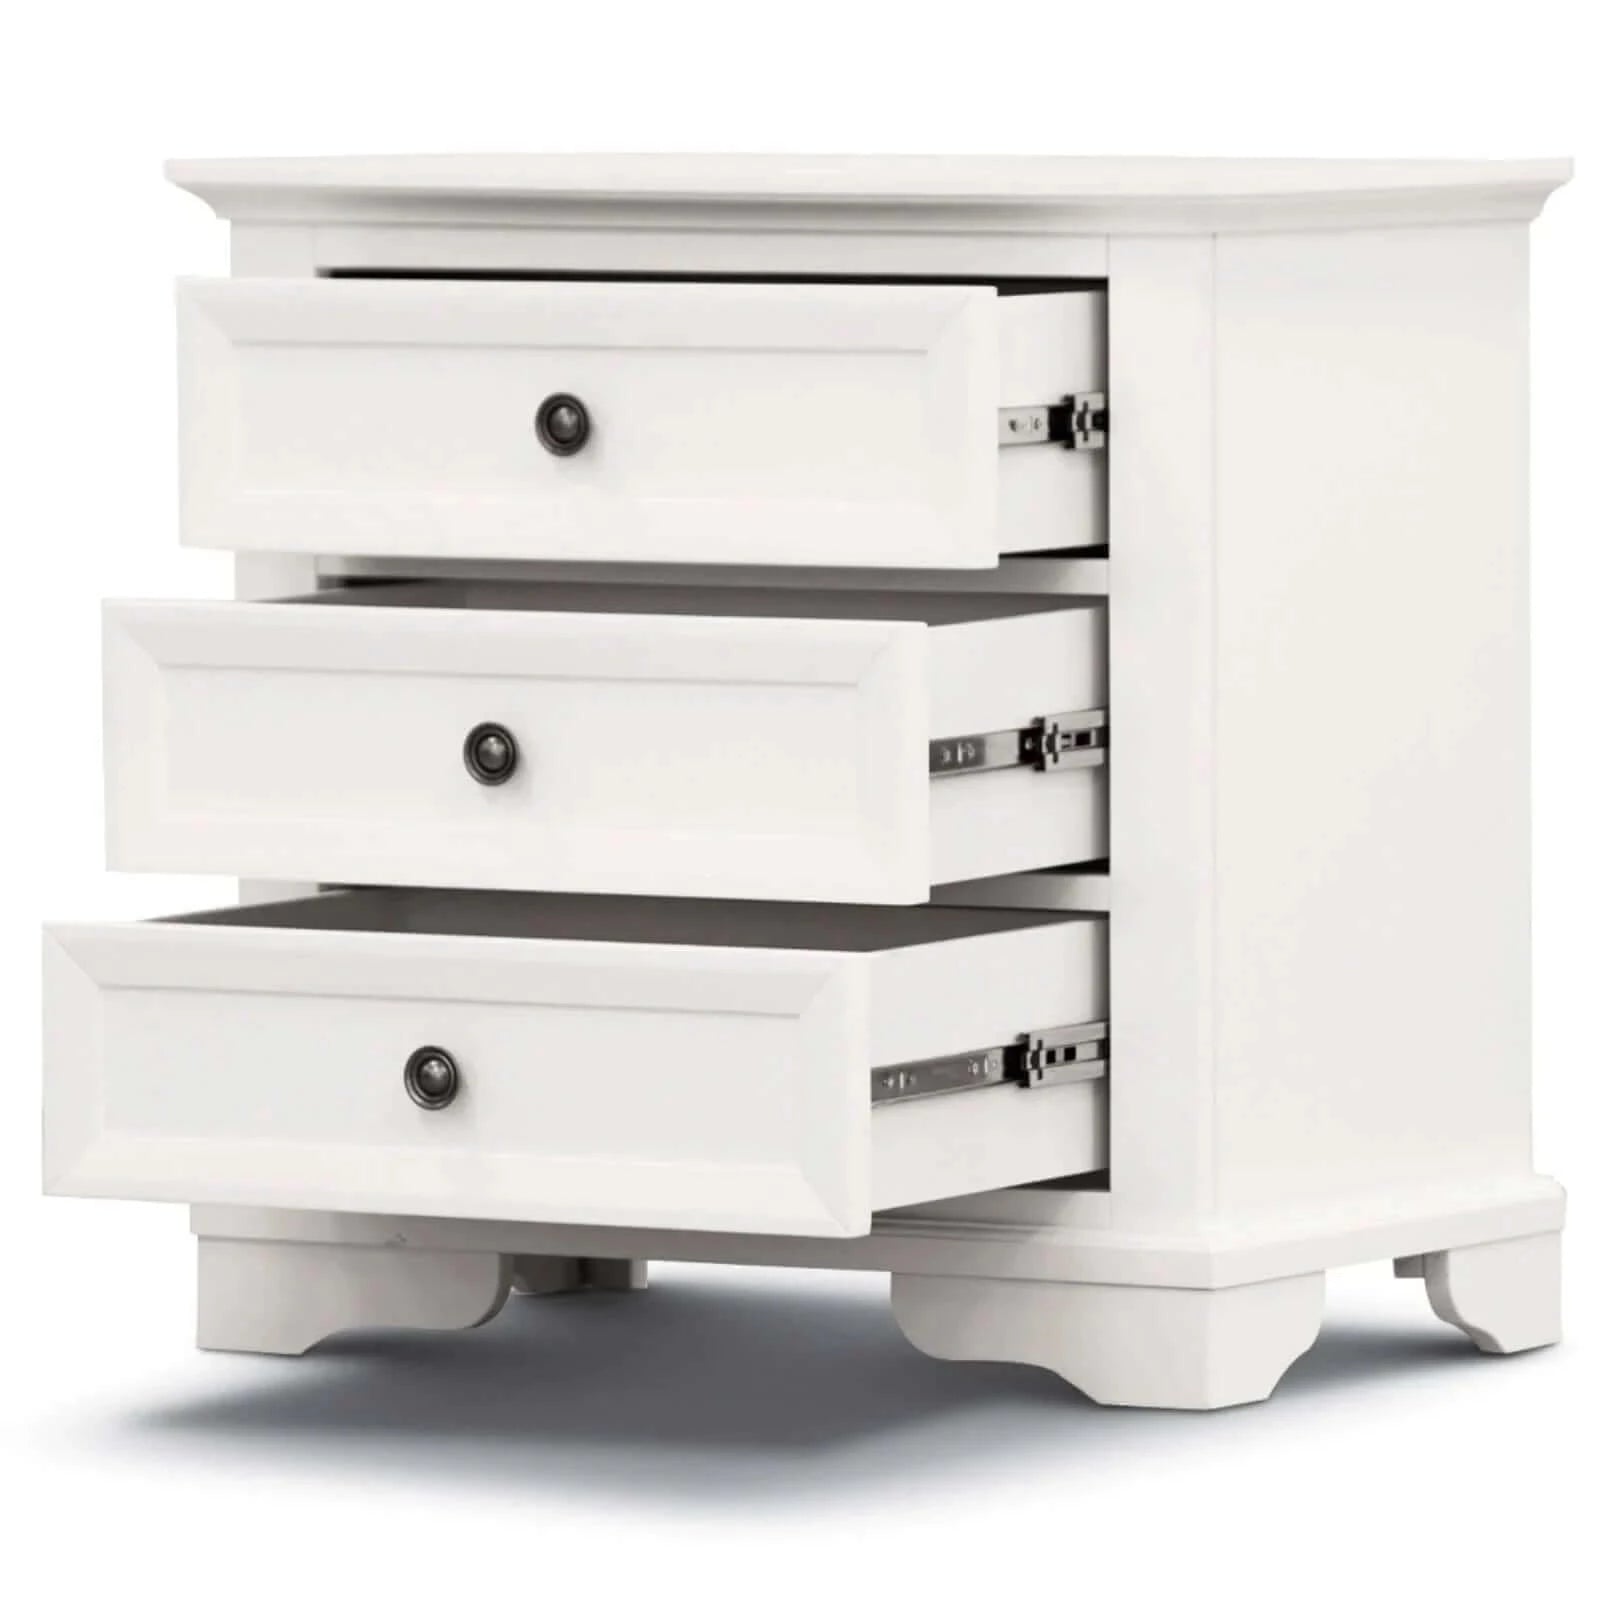 Buy celosia 4pc bedside dresser mirror bedroom chest of drawers set cabinet - white - upinteriors-Upinteriors